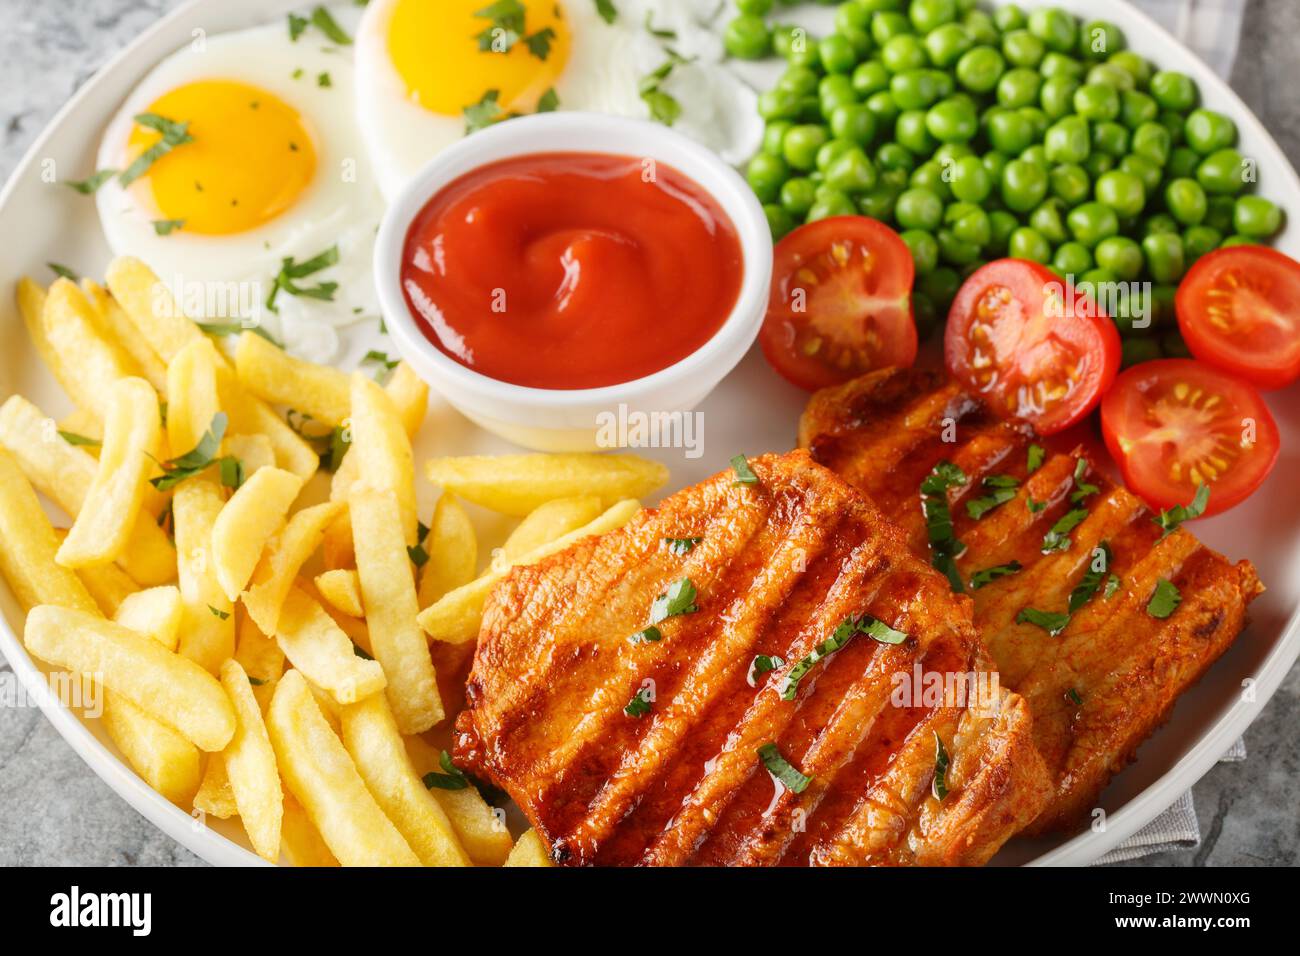 Hearty dinner of grilled loin steak with green peas, fried eggs, french fries, fresh tomatoes and sauce close-up in a plate on the table. Horizontal Stock Photo